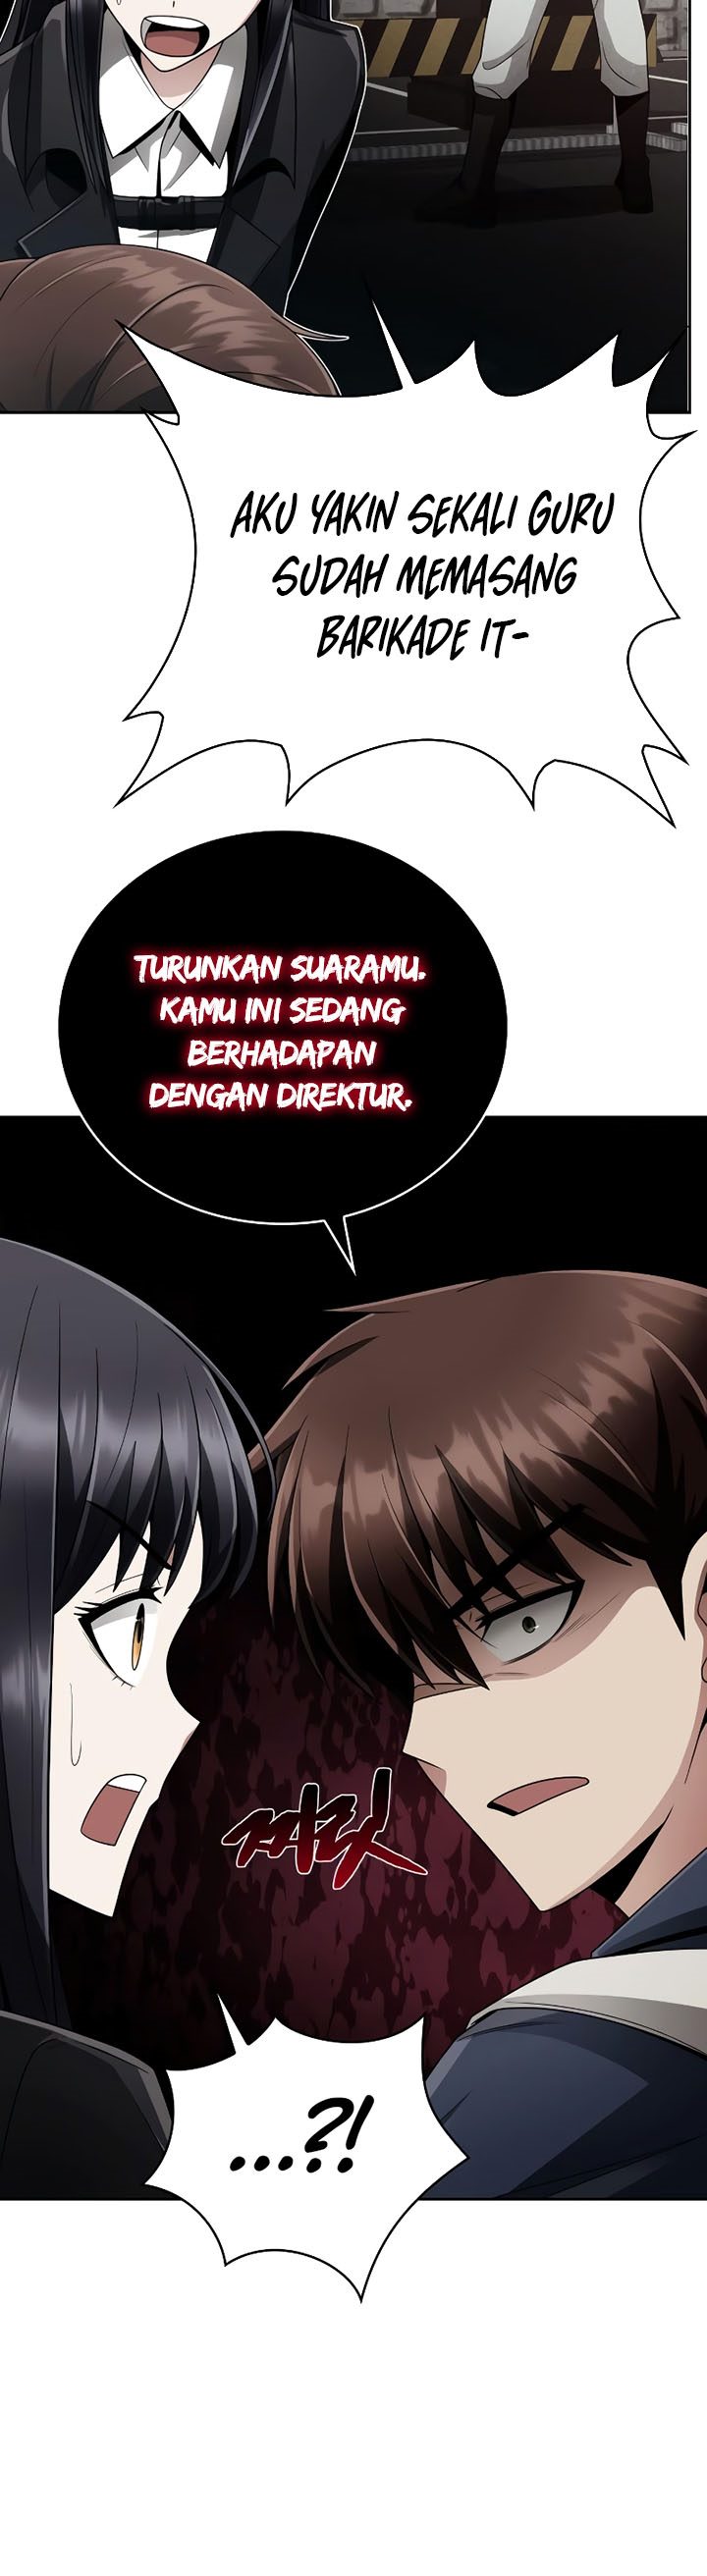 Dilarang COPAS - situs resmi www.mangacanblog.com - Komik clever cleaning life of the returned genius hunter 019 - chapter 19 20 Indonesia clever cleaning life of the returned genius hunter 019 - chapter 19 Terbaru 33|Baca Manga Komik Indonesia|Mangacan